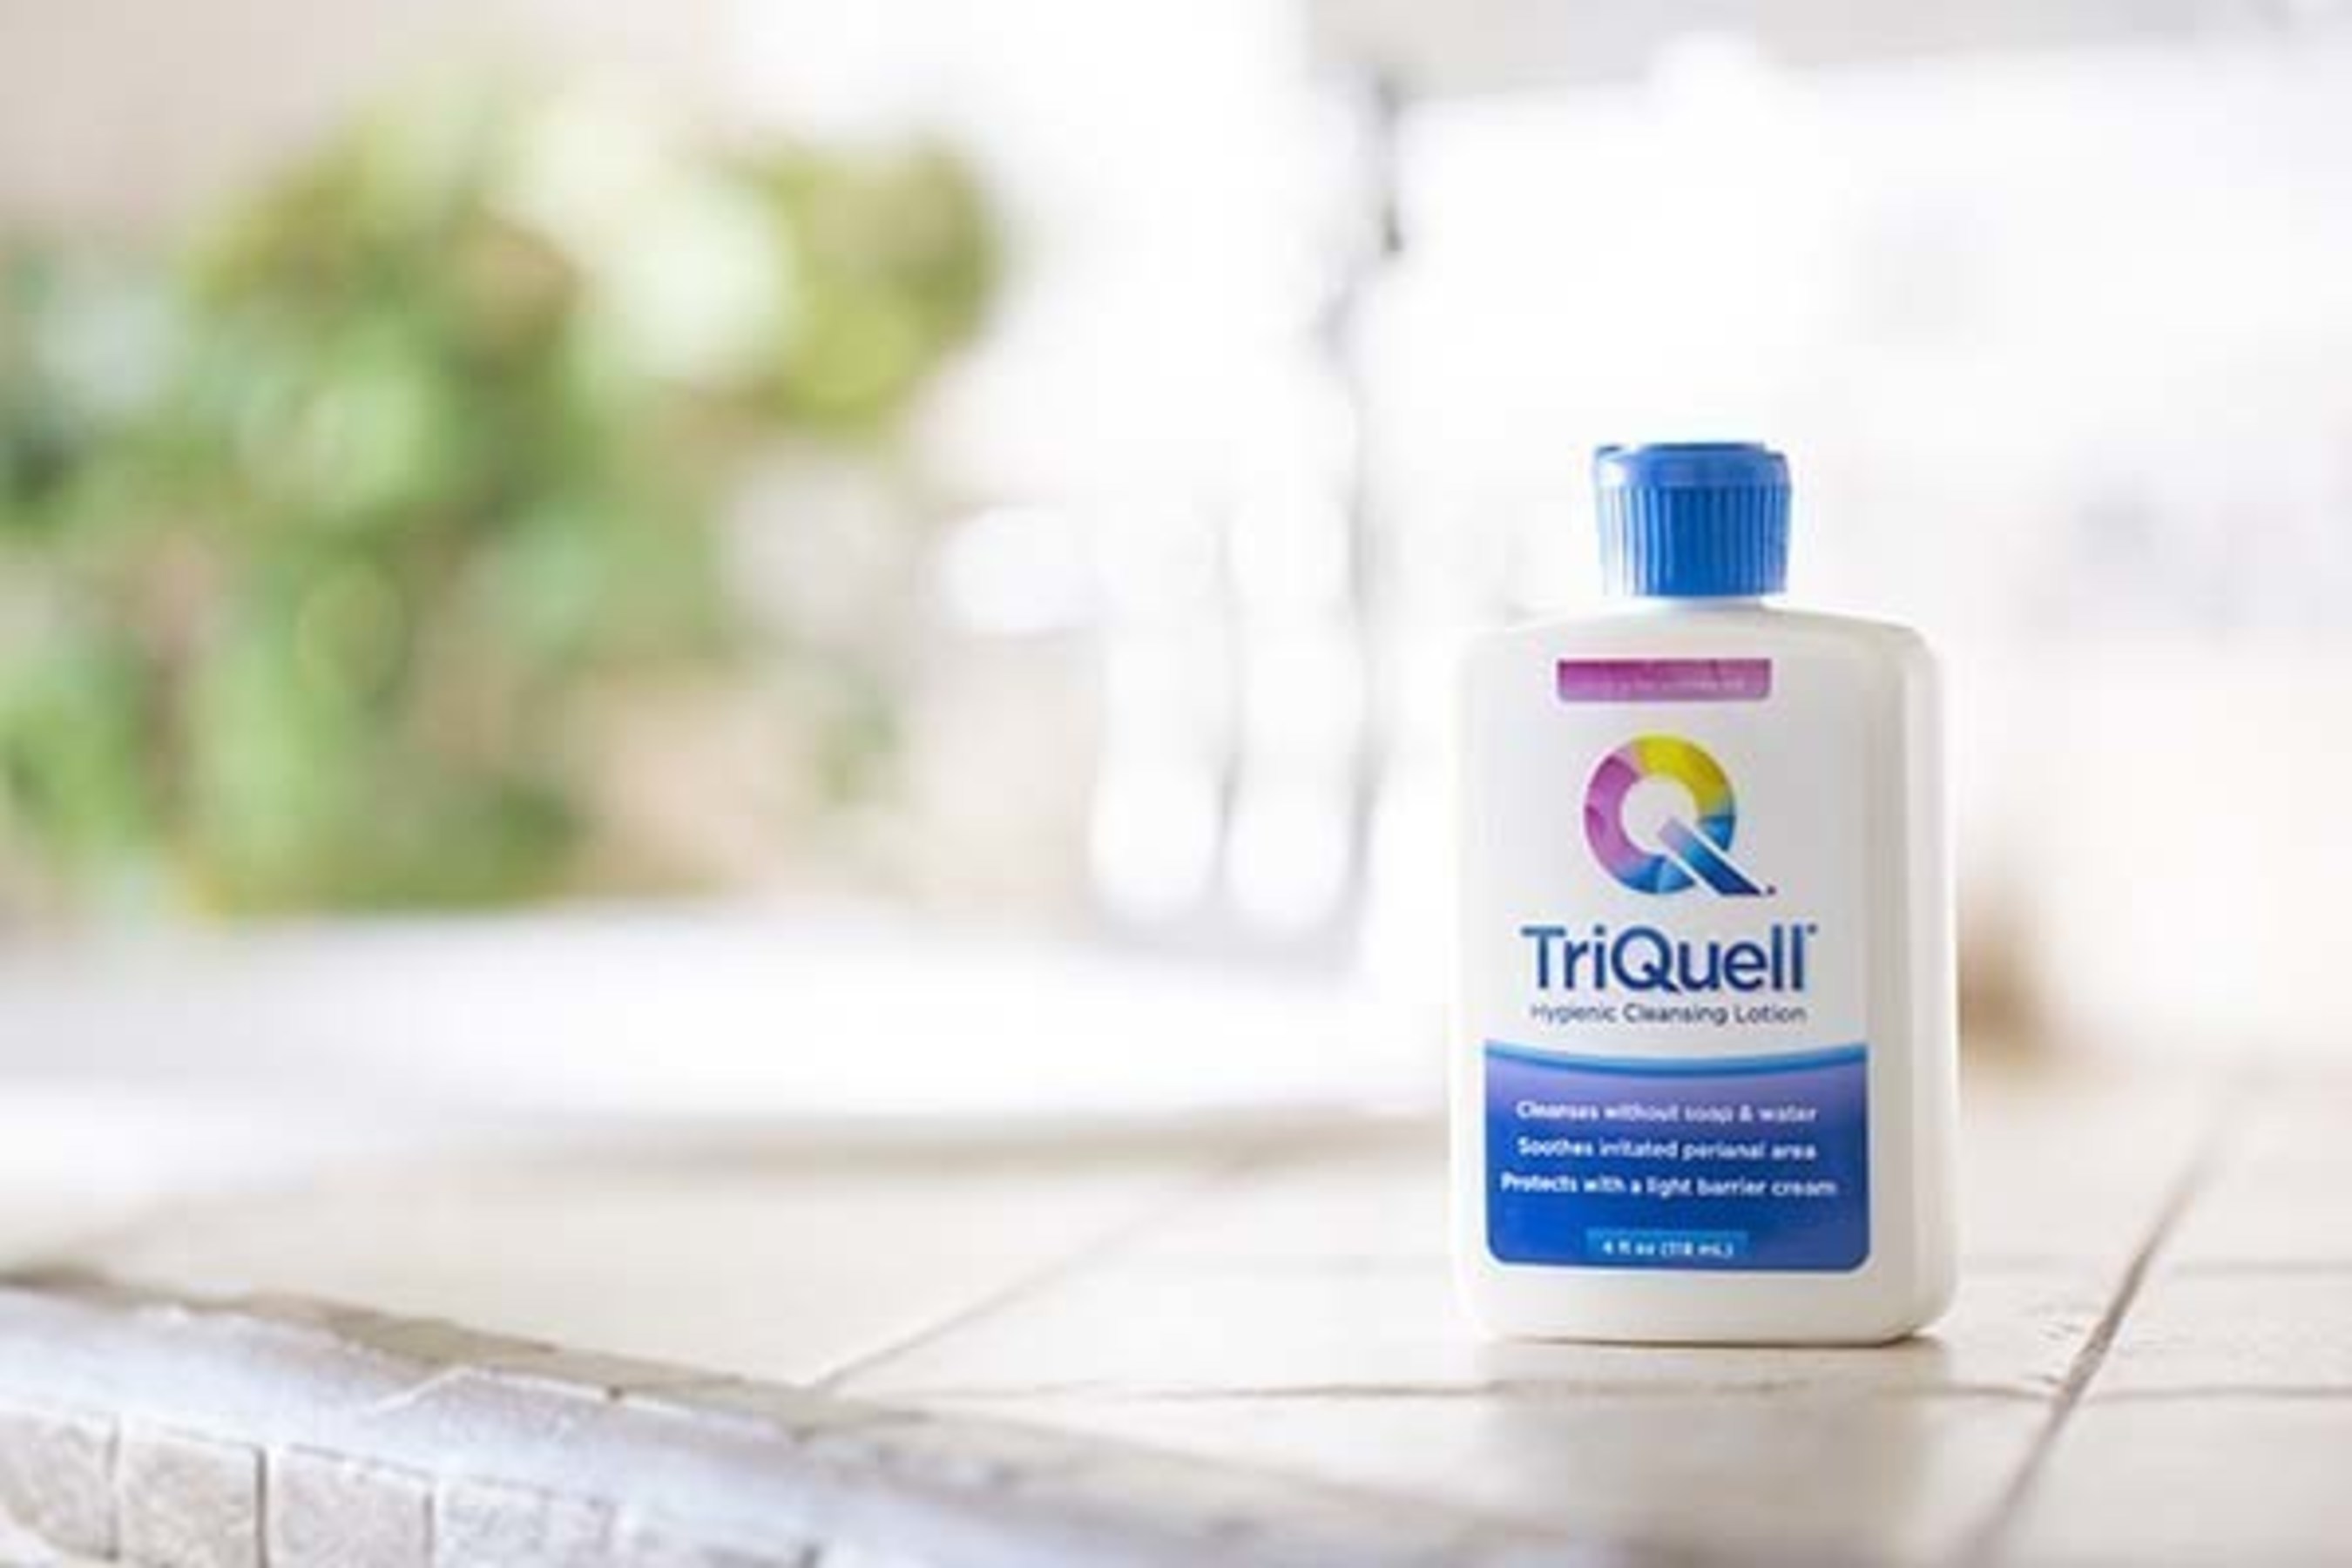 TriQuell enhances toilet paper's ability to get you gently and thoroughly clean (no water required).